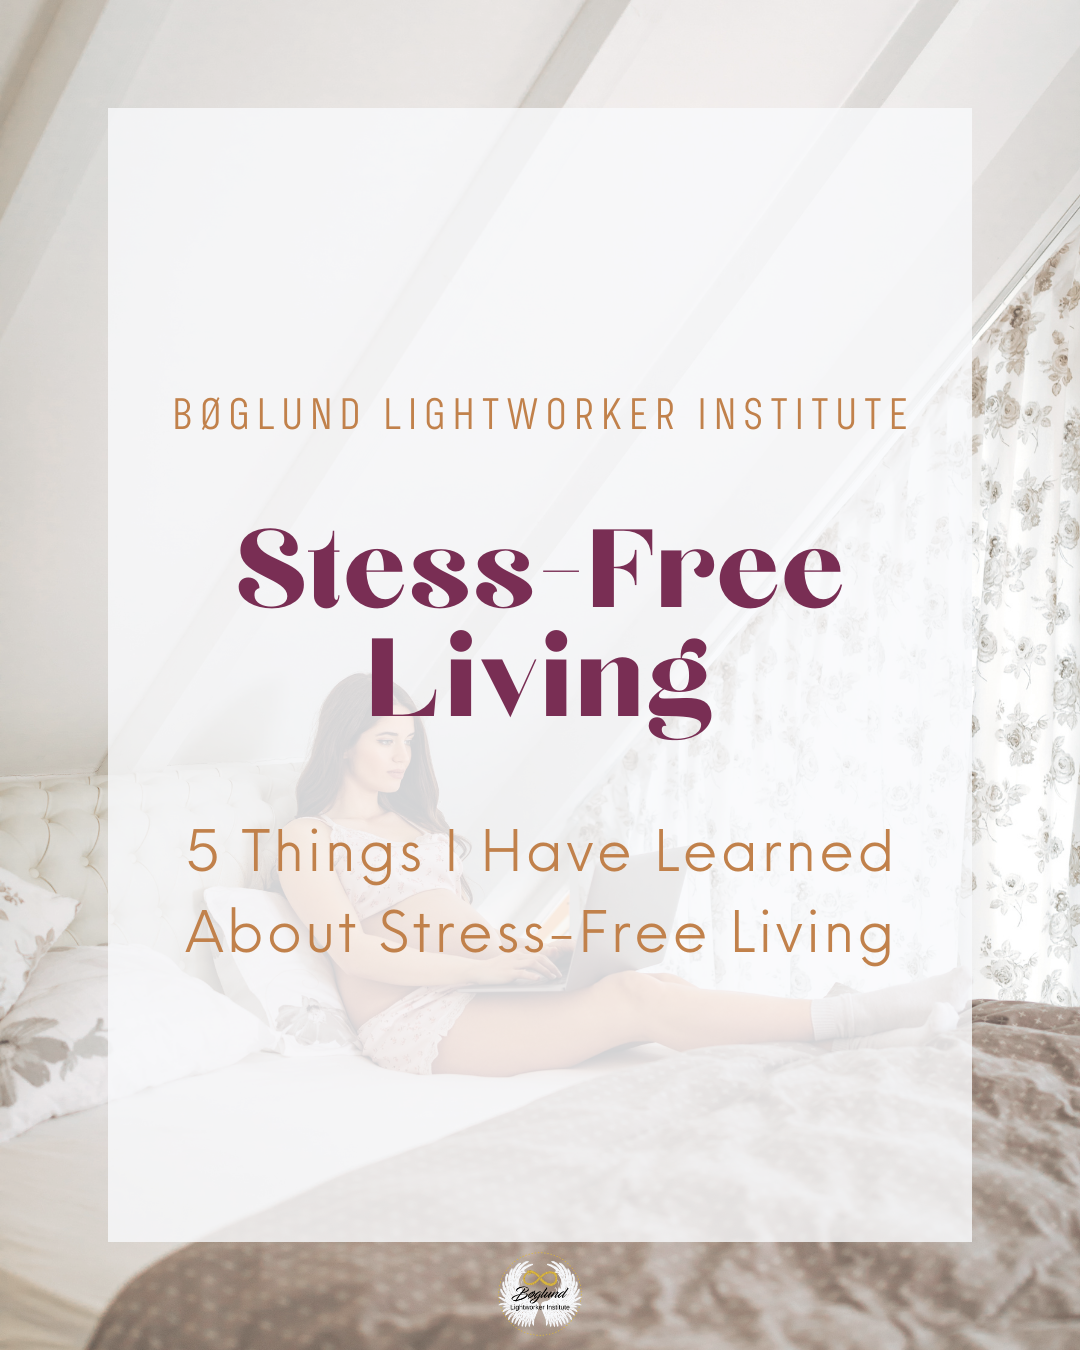 In a world with constant updates, it can be difficult to take a break. In this article I have collected 5 lessons about stress-free living.